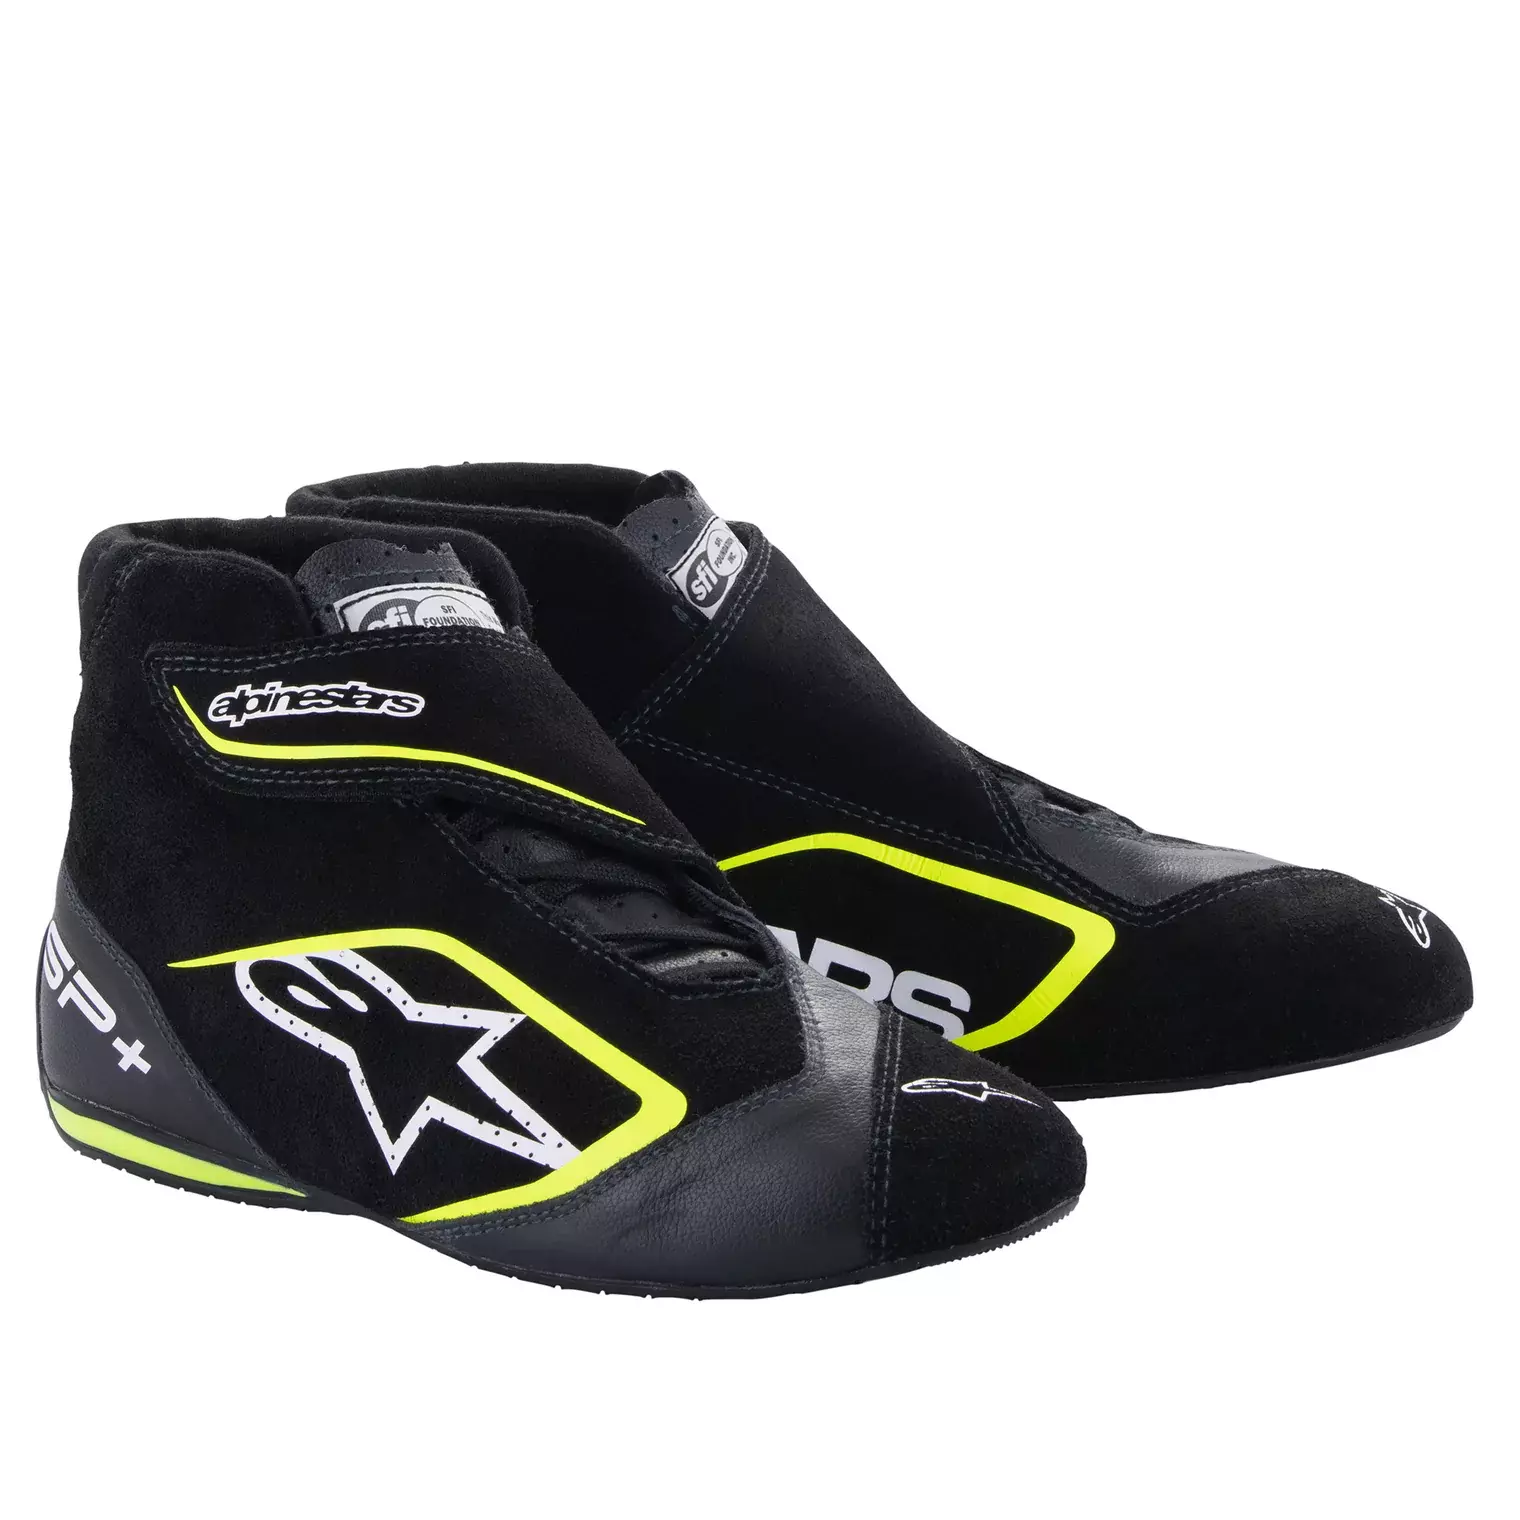 Alpinestars 2710823-155-12 Driving Shoe, SP+, Mid-Top, SFI 3.3, FIA Approved, Suede Outer, Nomex Inner, Black / Fluorescent Yellow, Size 12, Pair